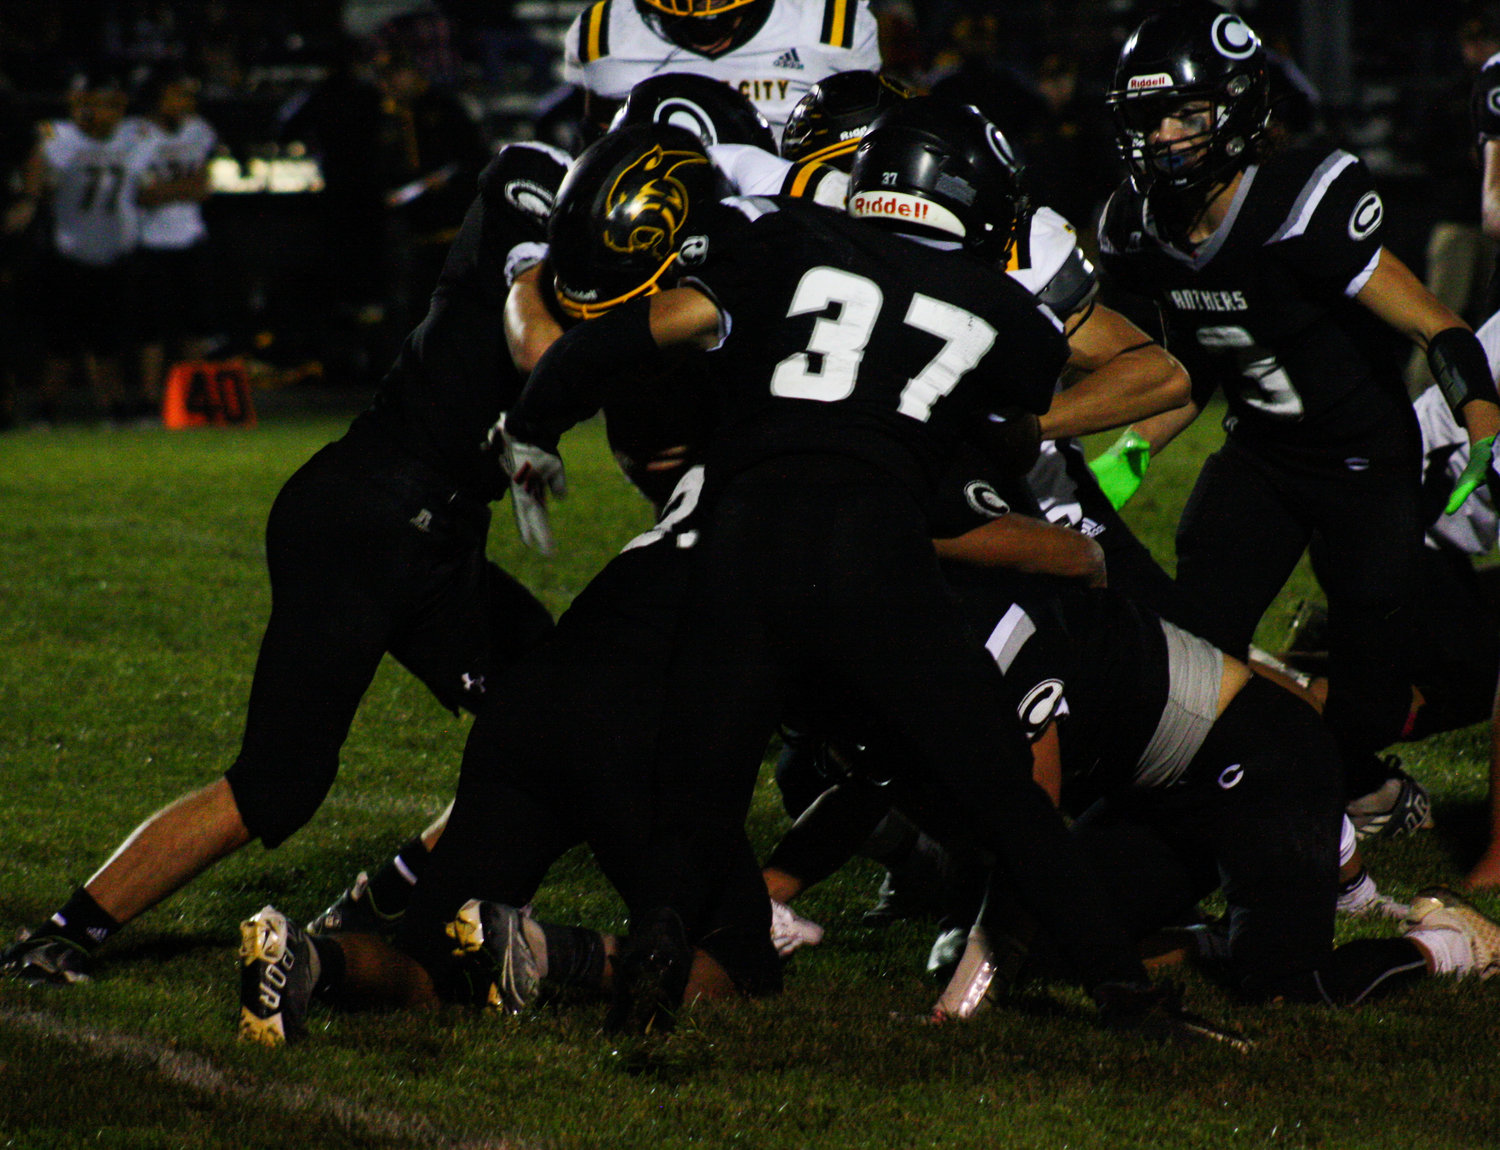 Centralia junior linebacker Jesse Caballero (37) leads the swarm of Panthers on Friday in tackling Monroe City running back Ceaton Pennewell. Pennewell scored four touchdowns in Centralia's 28-7 loss at Miller Field in Centralia.